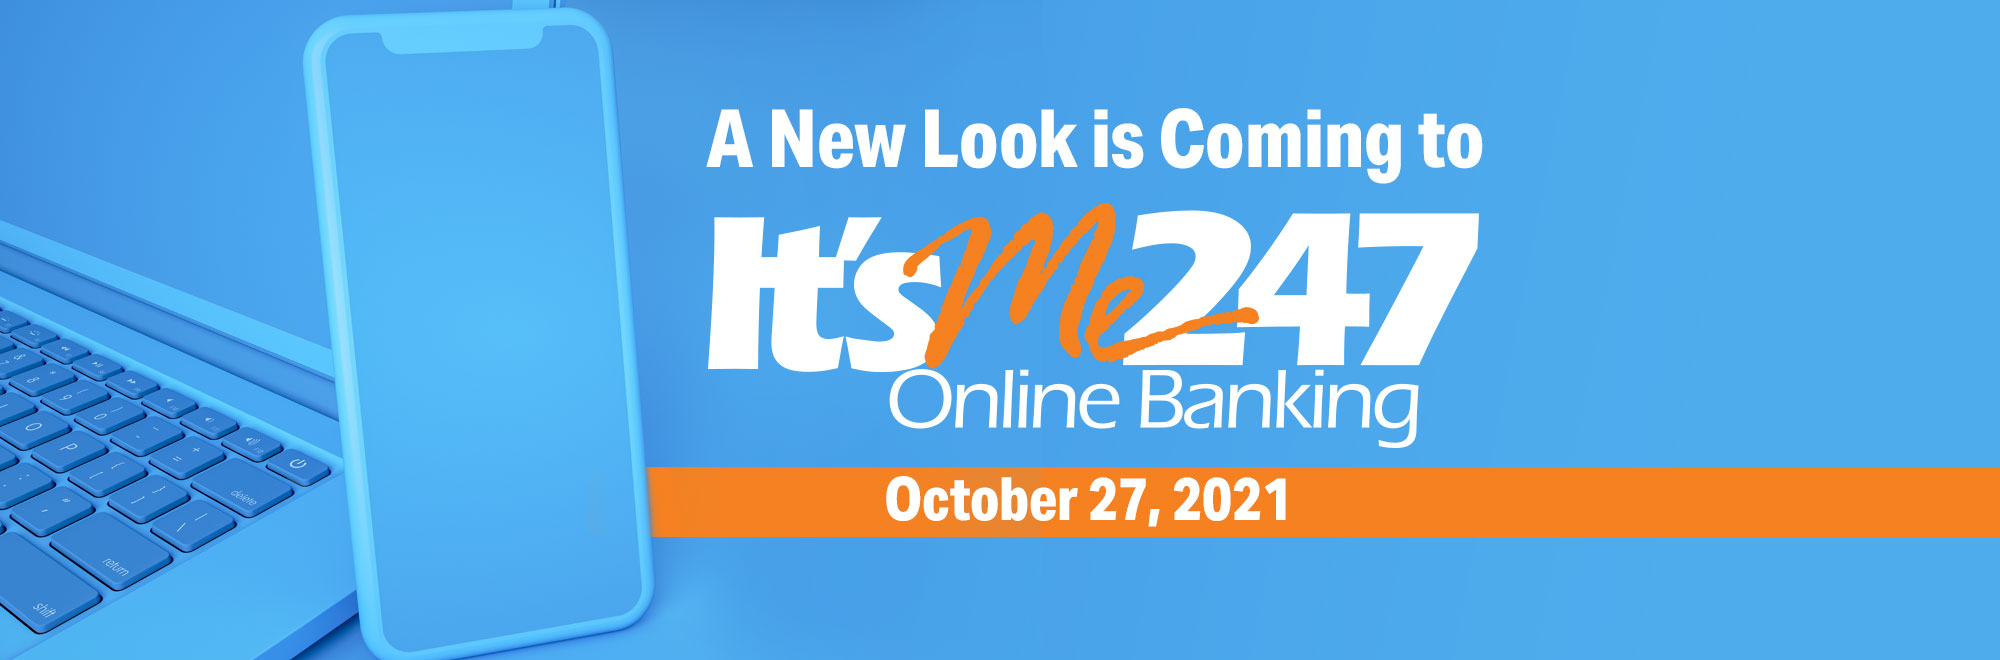 It' s Me 247 Online Banking gets a new Look and Feel 10-27-2021